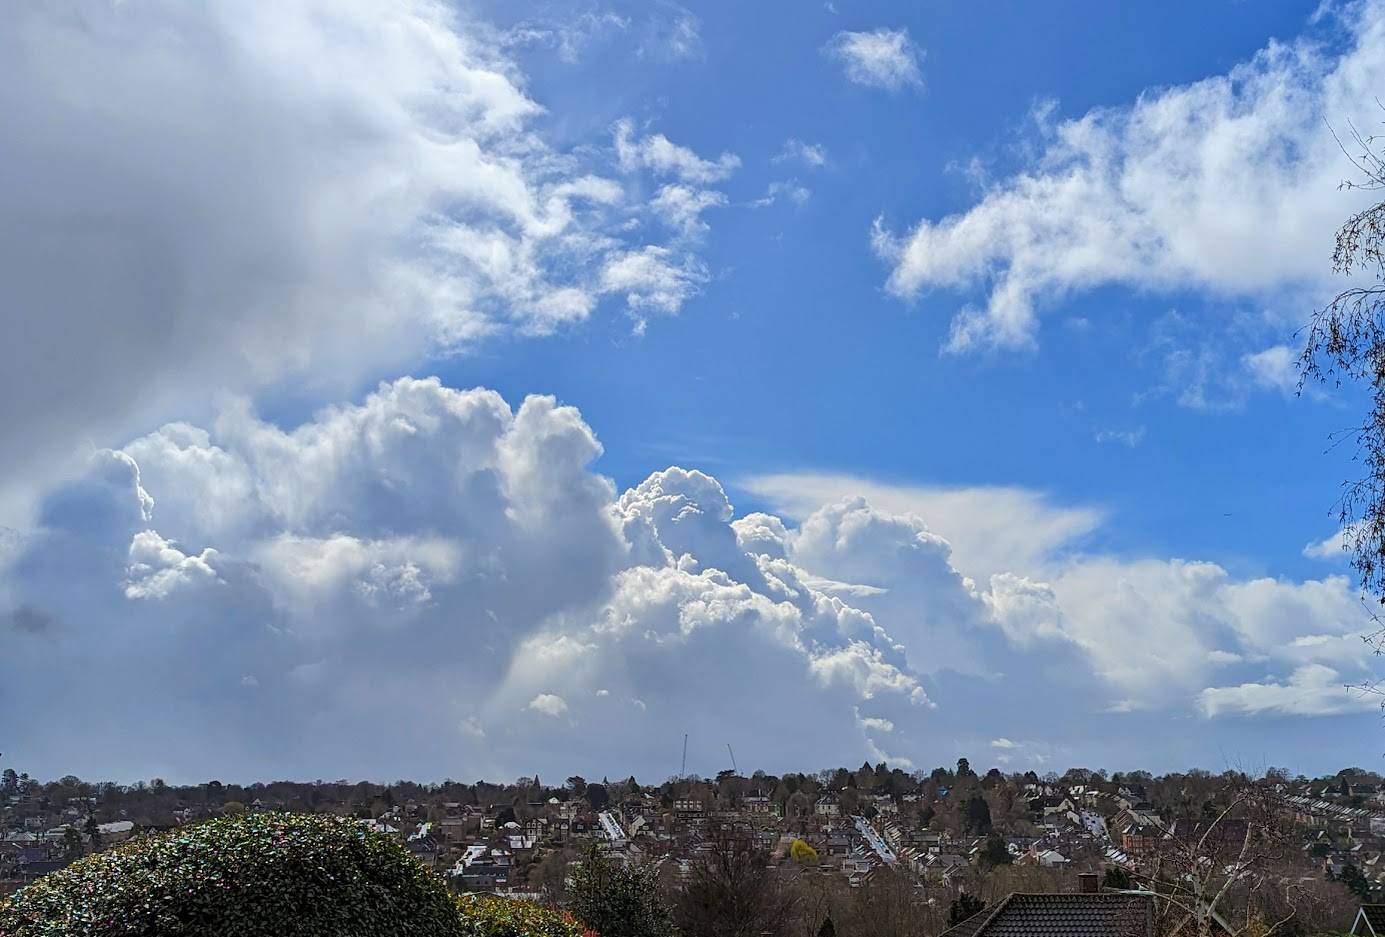 Sunny spells and downpours Berkhamsted, Herts,, sent by Brian Gaze